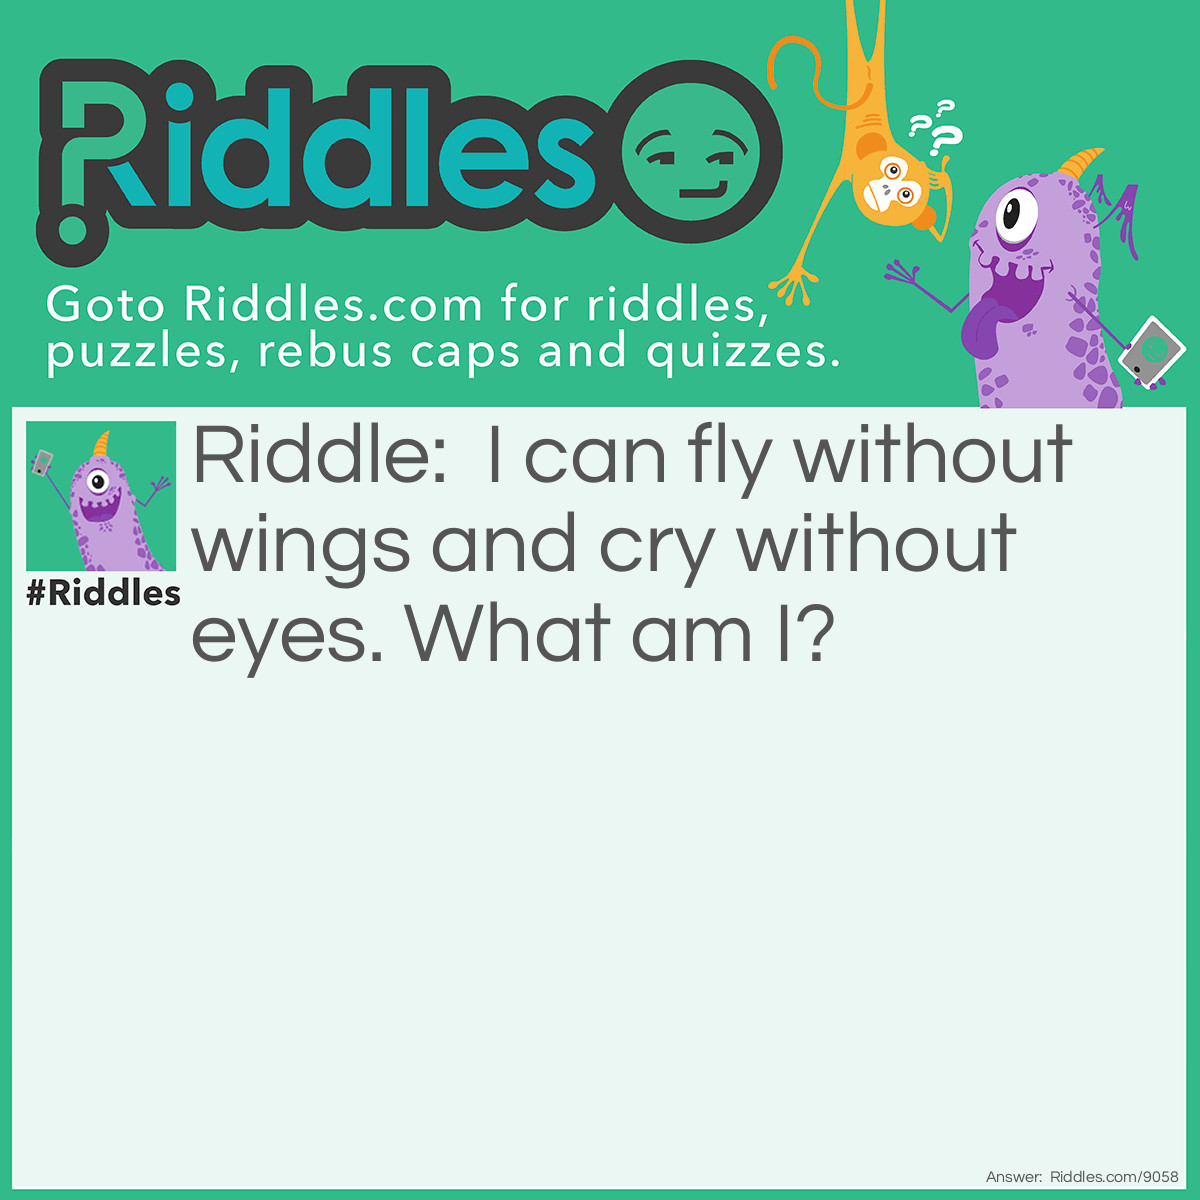 Riddle: I can fly without wings and cry without eyes. What am I? Answer: Cloud